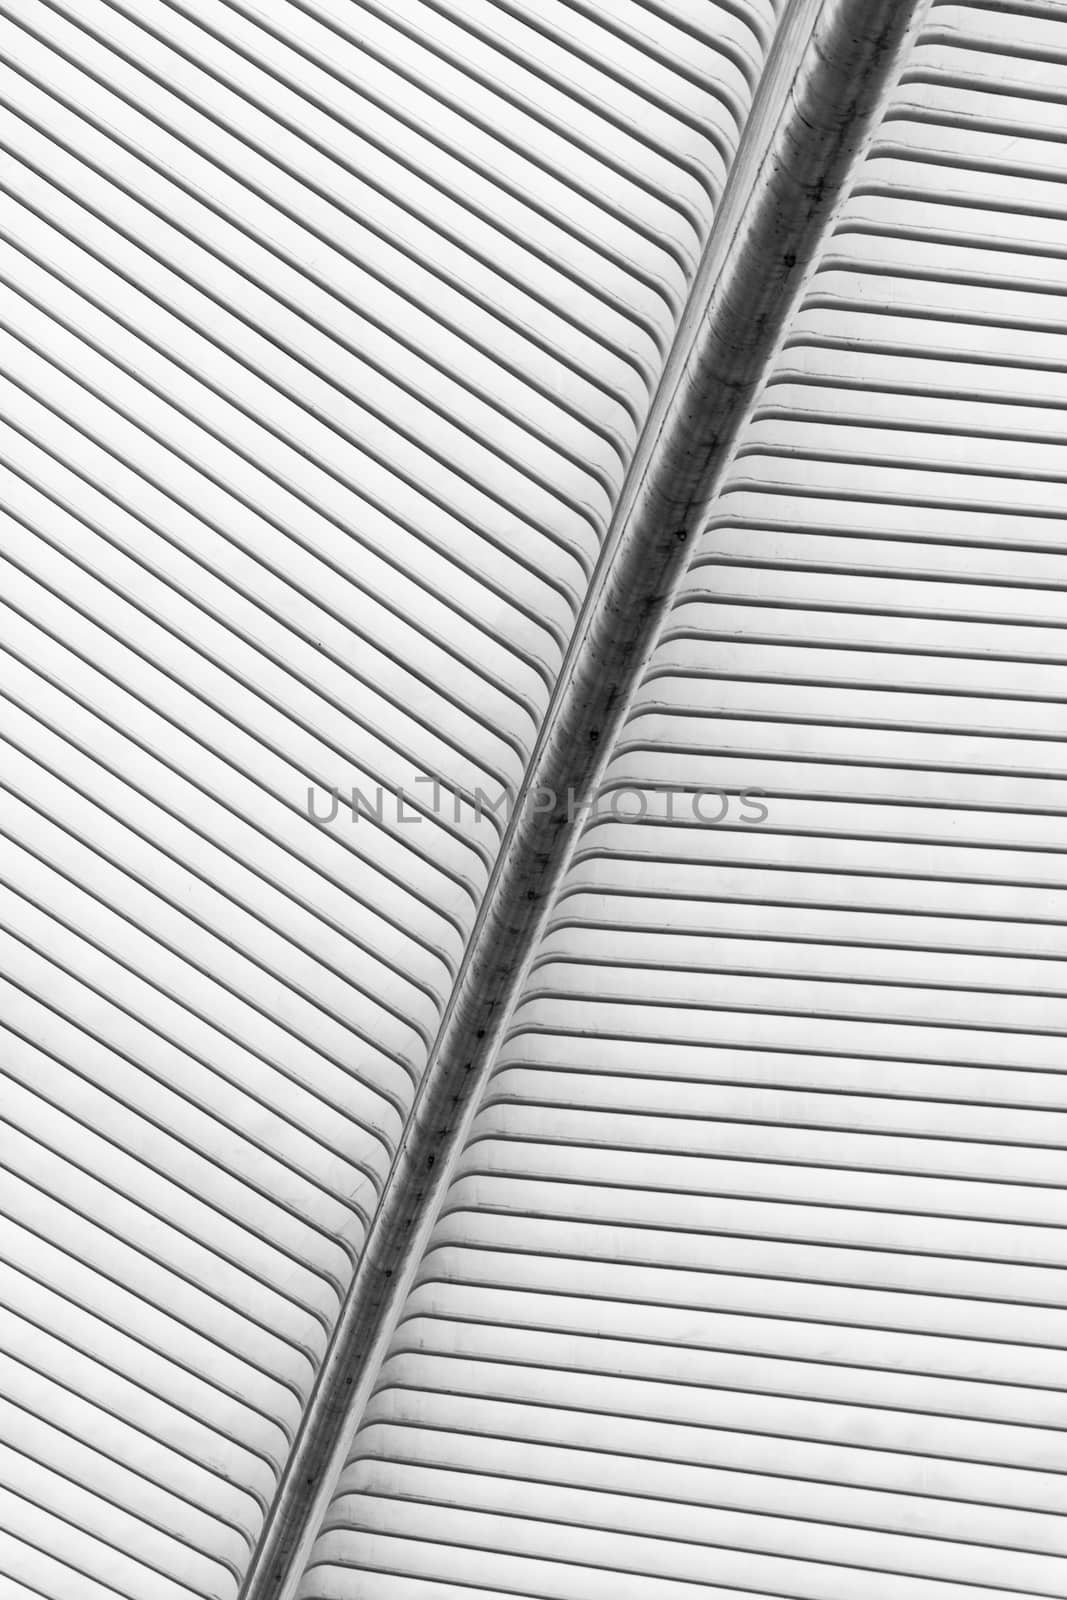 Steel roof structure liege guillemins railway station